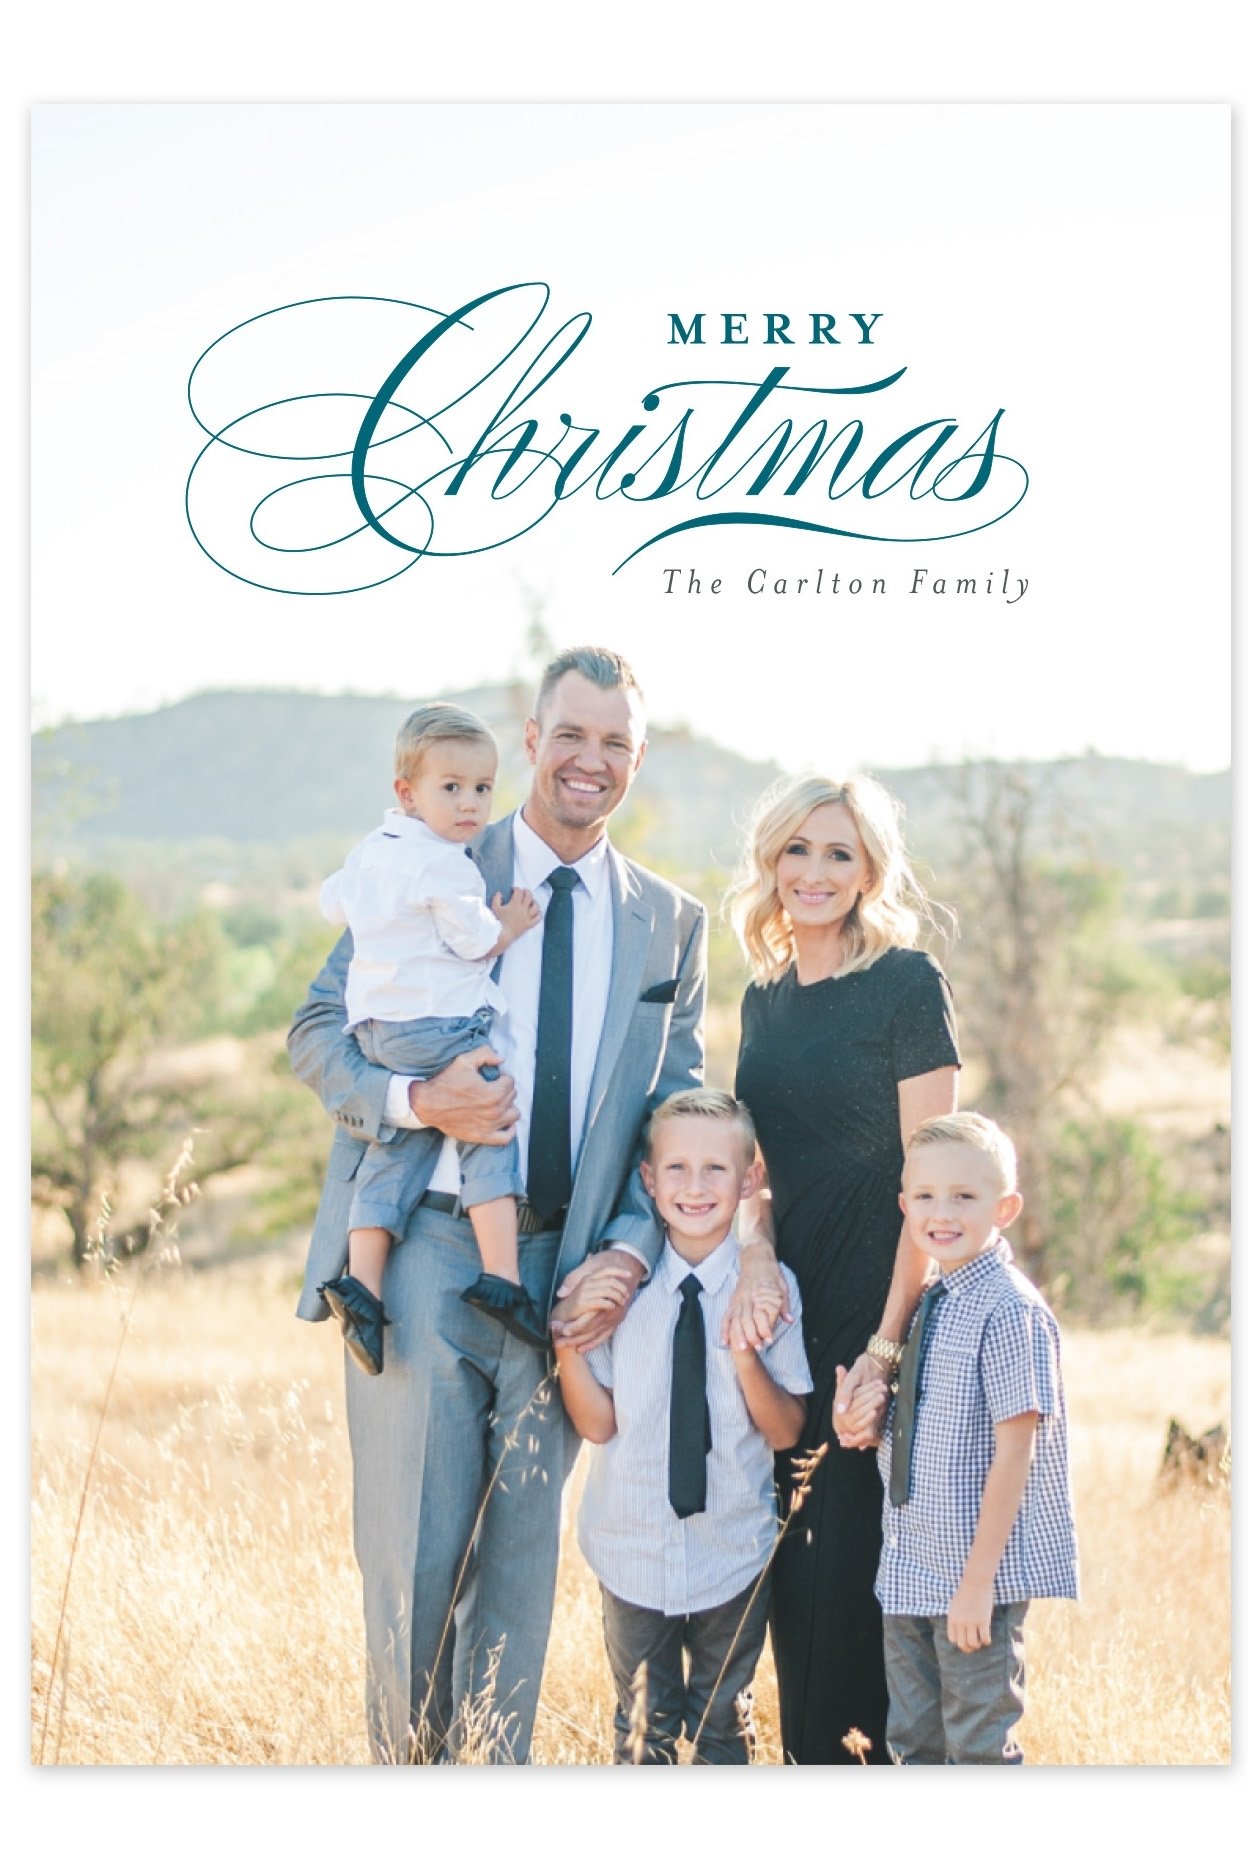 10 Best Ideas For Christmas Card Photos christmas picture card ideas merry christmas and happy new year 2018 2023